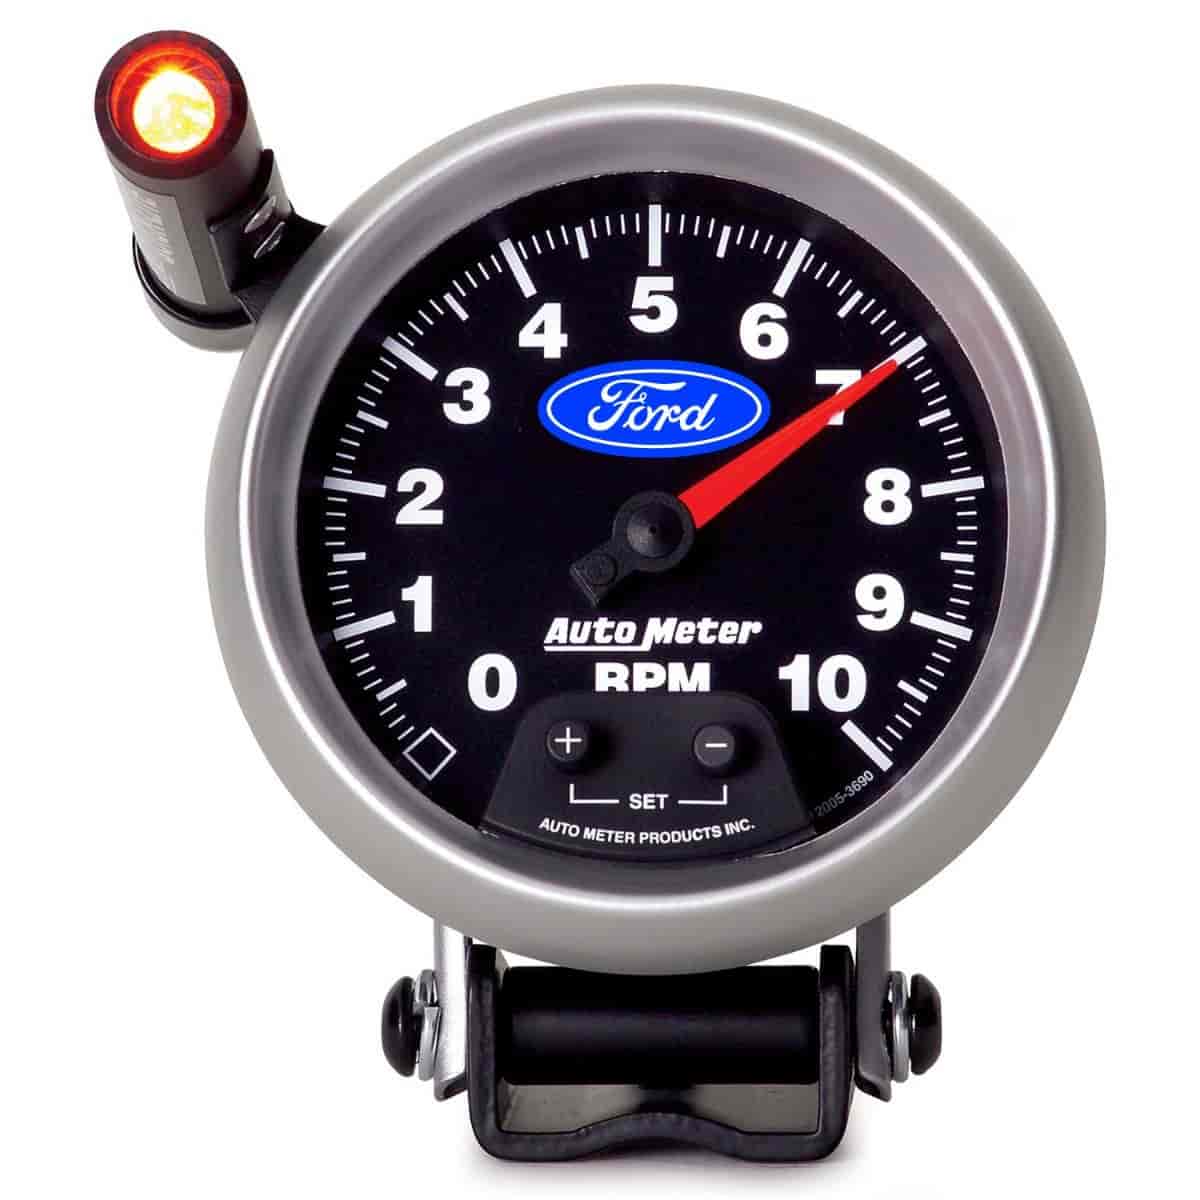 Officially-Licensed Ford Tachometer 3 3/4 in., 0-10,000 RPM, Electrical (Full Sweep)